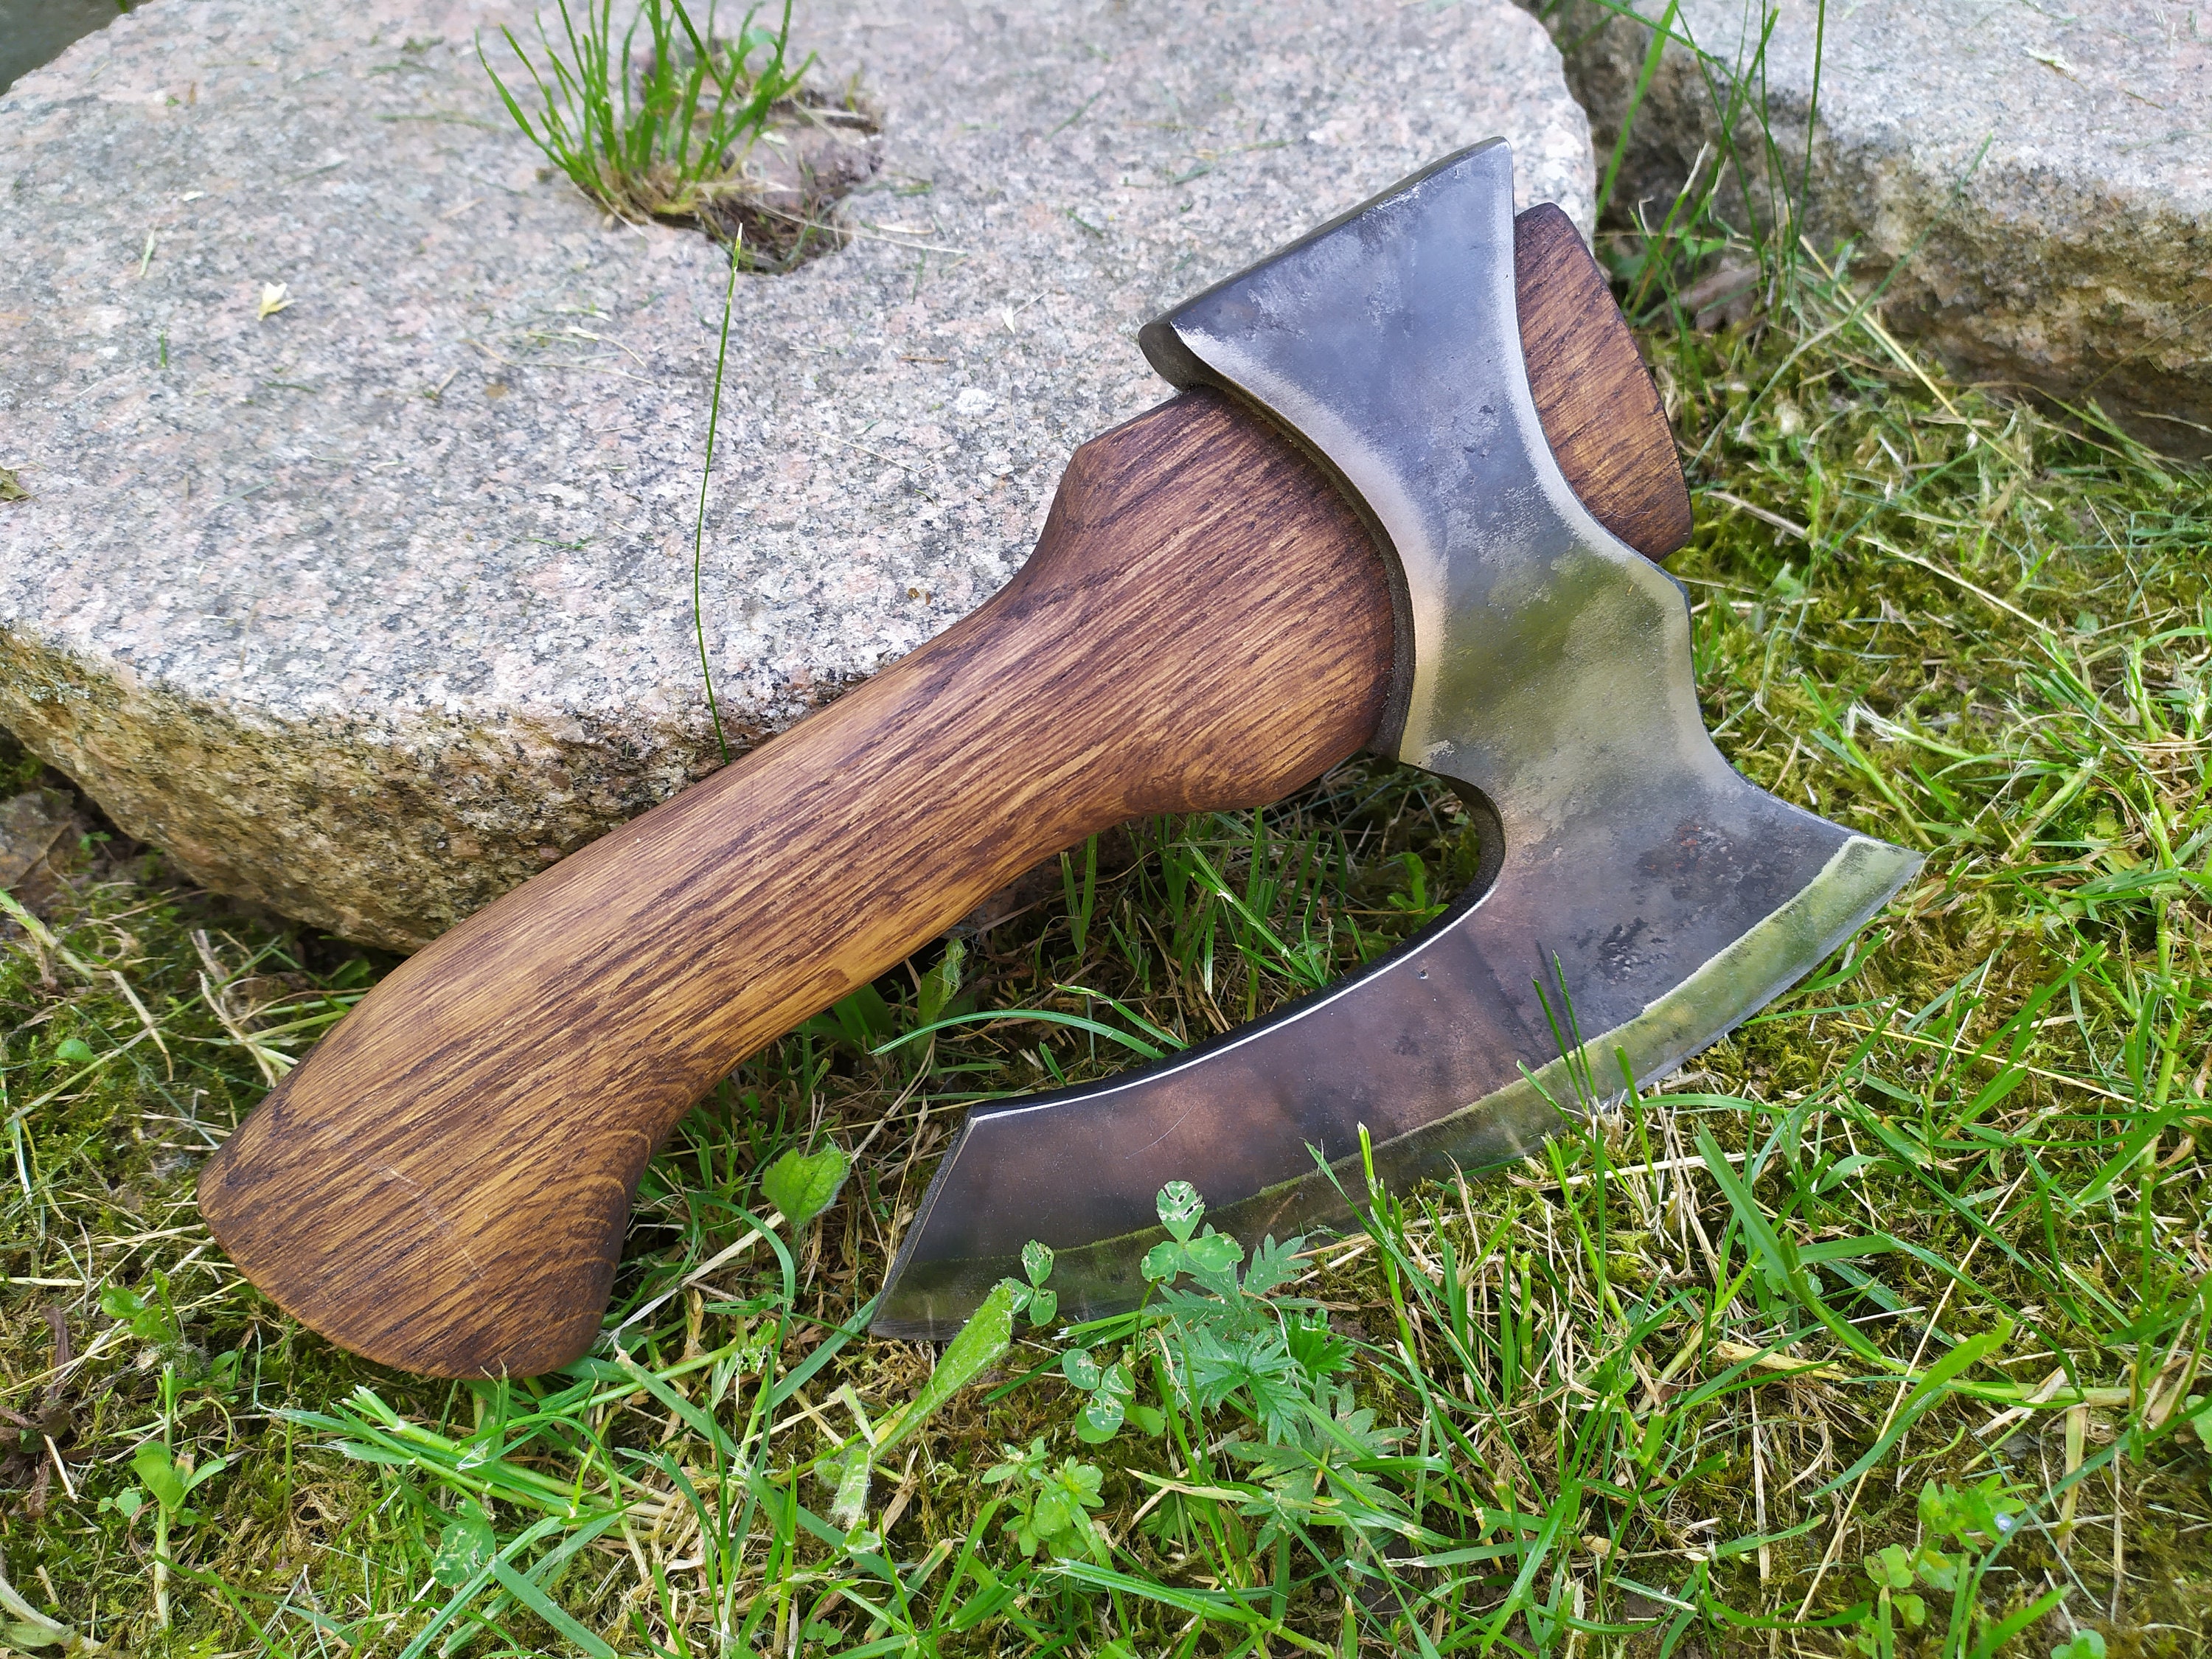 Heavy Fist Axe, Camping Axe, Kitchen Axe, Anniversary Gift, Bearded Axe,  Herb Chopper, Cooking, Kitchen Decor, Gift for Coock 